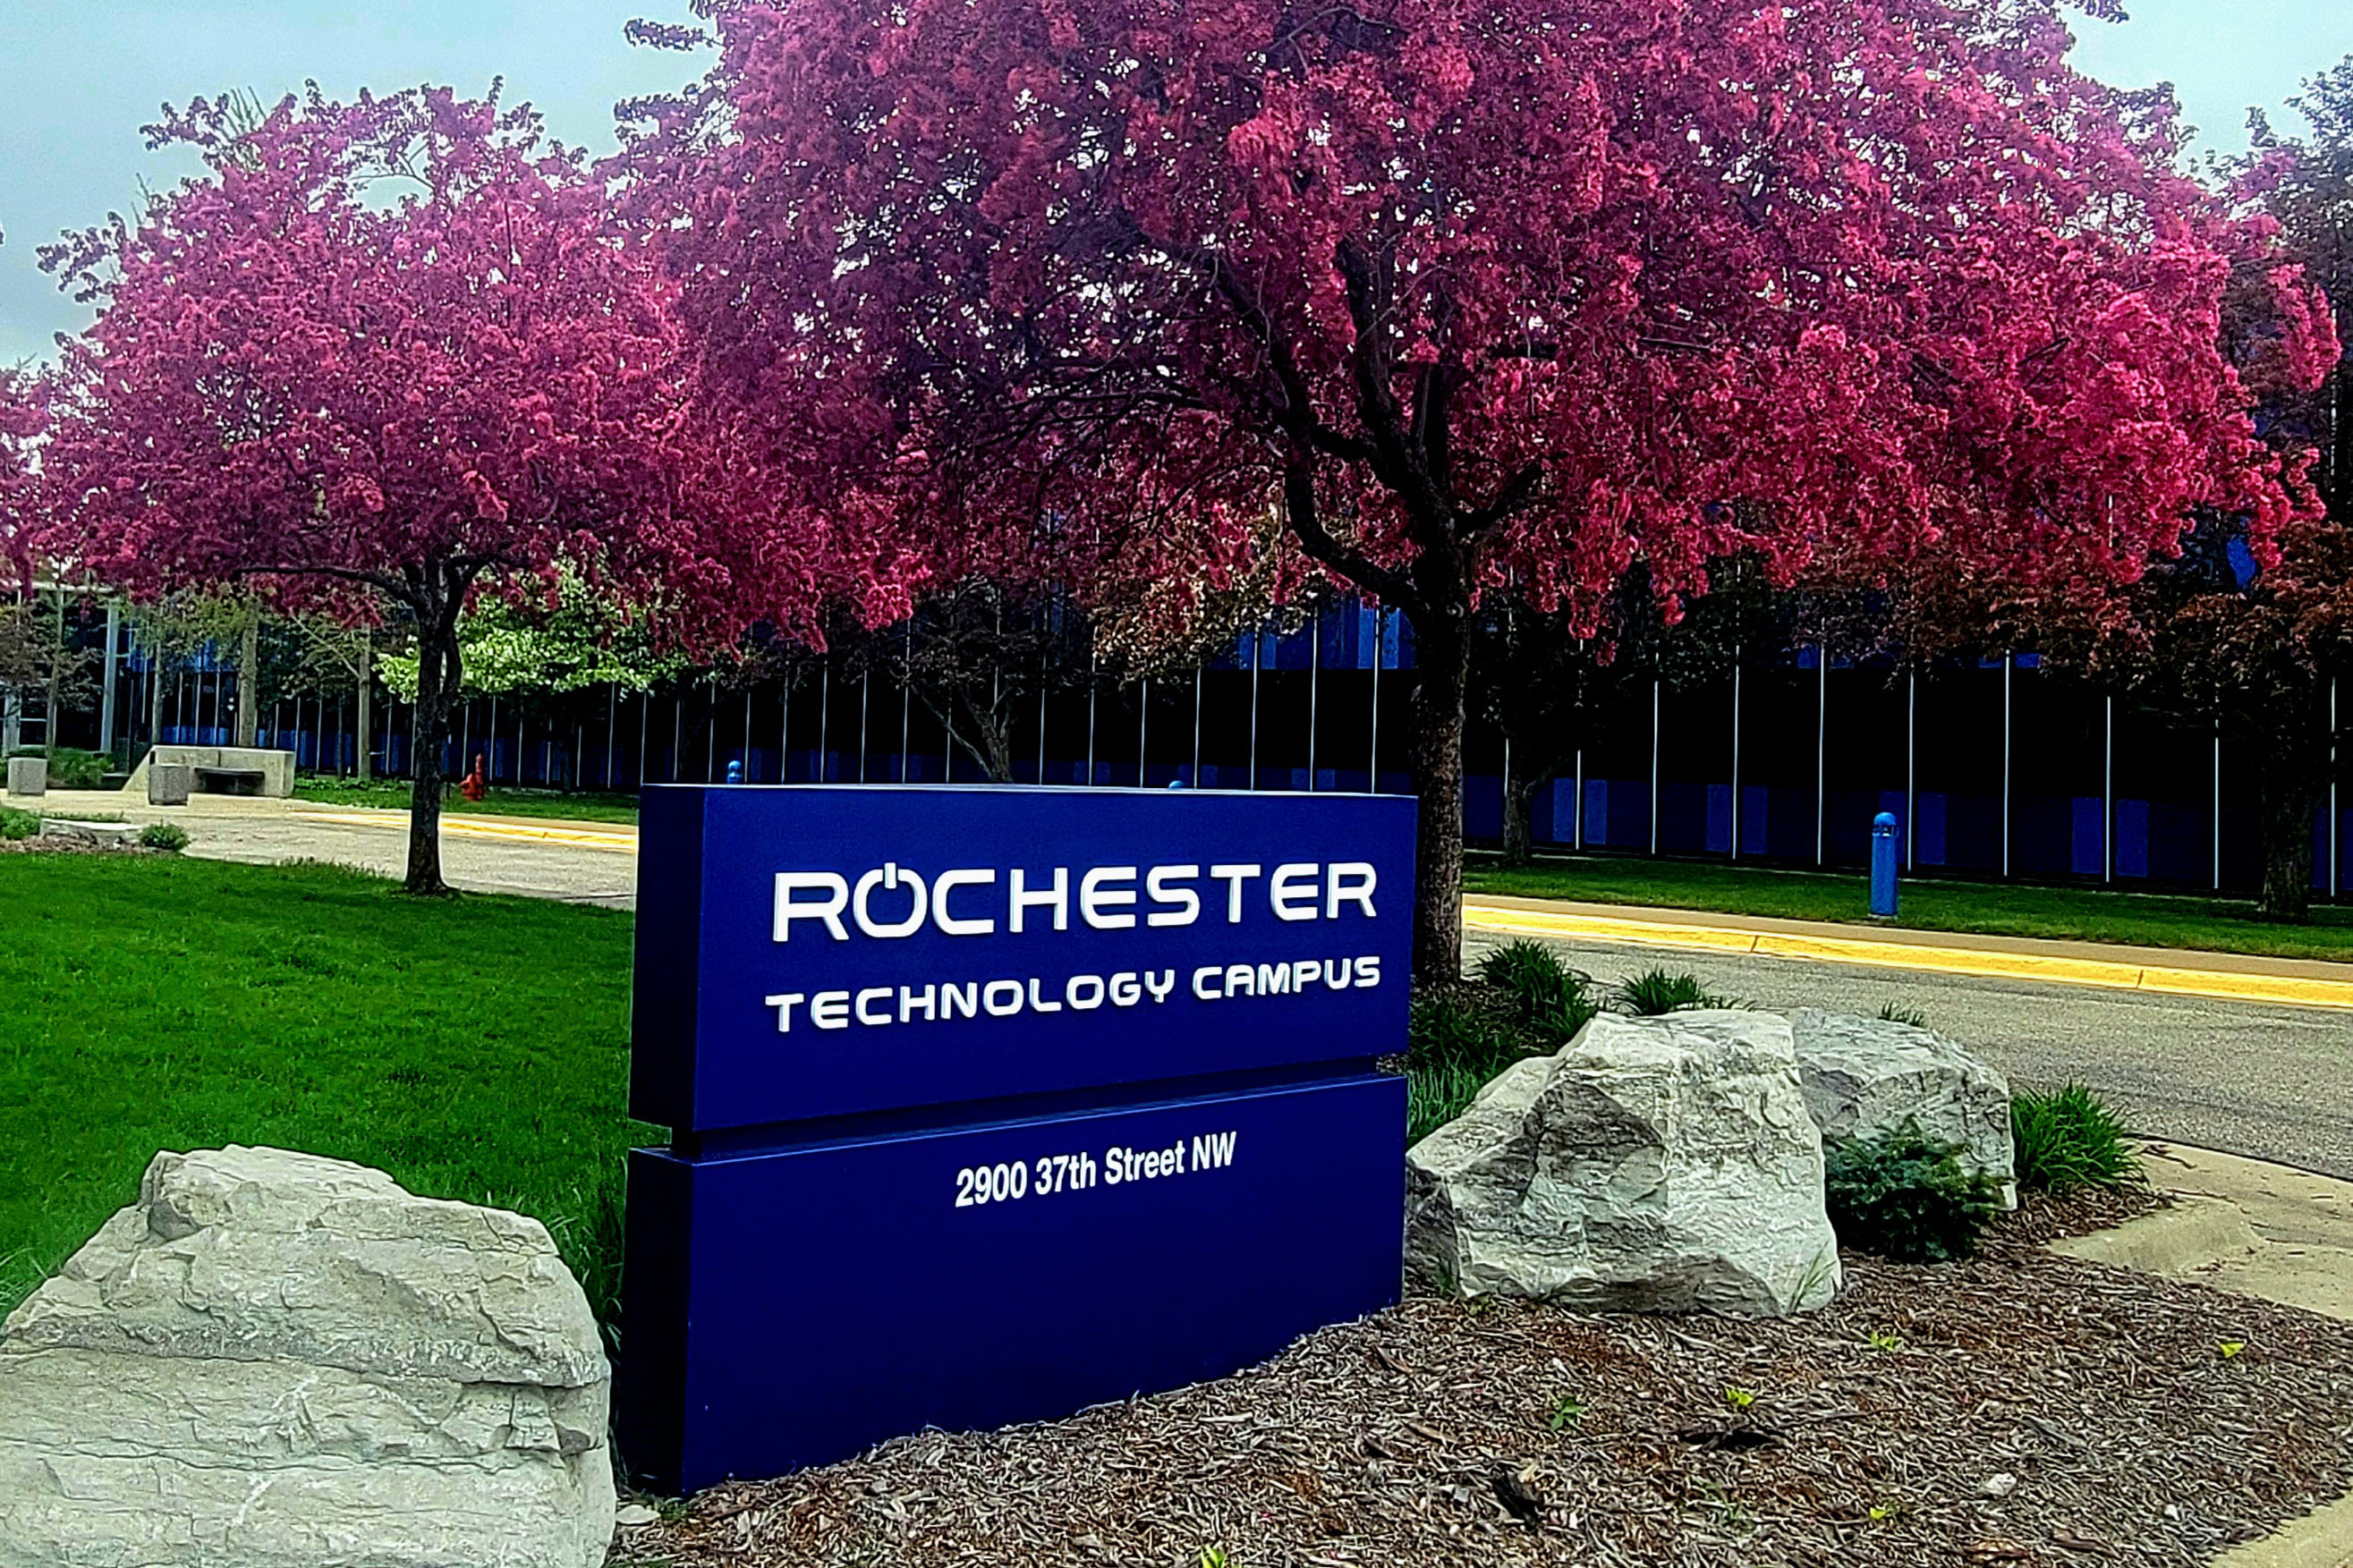 Waters Medical to move its operations to the Rochester Technology Campus